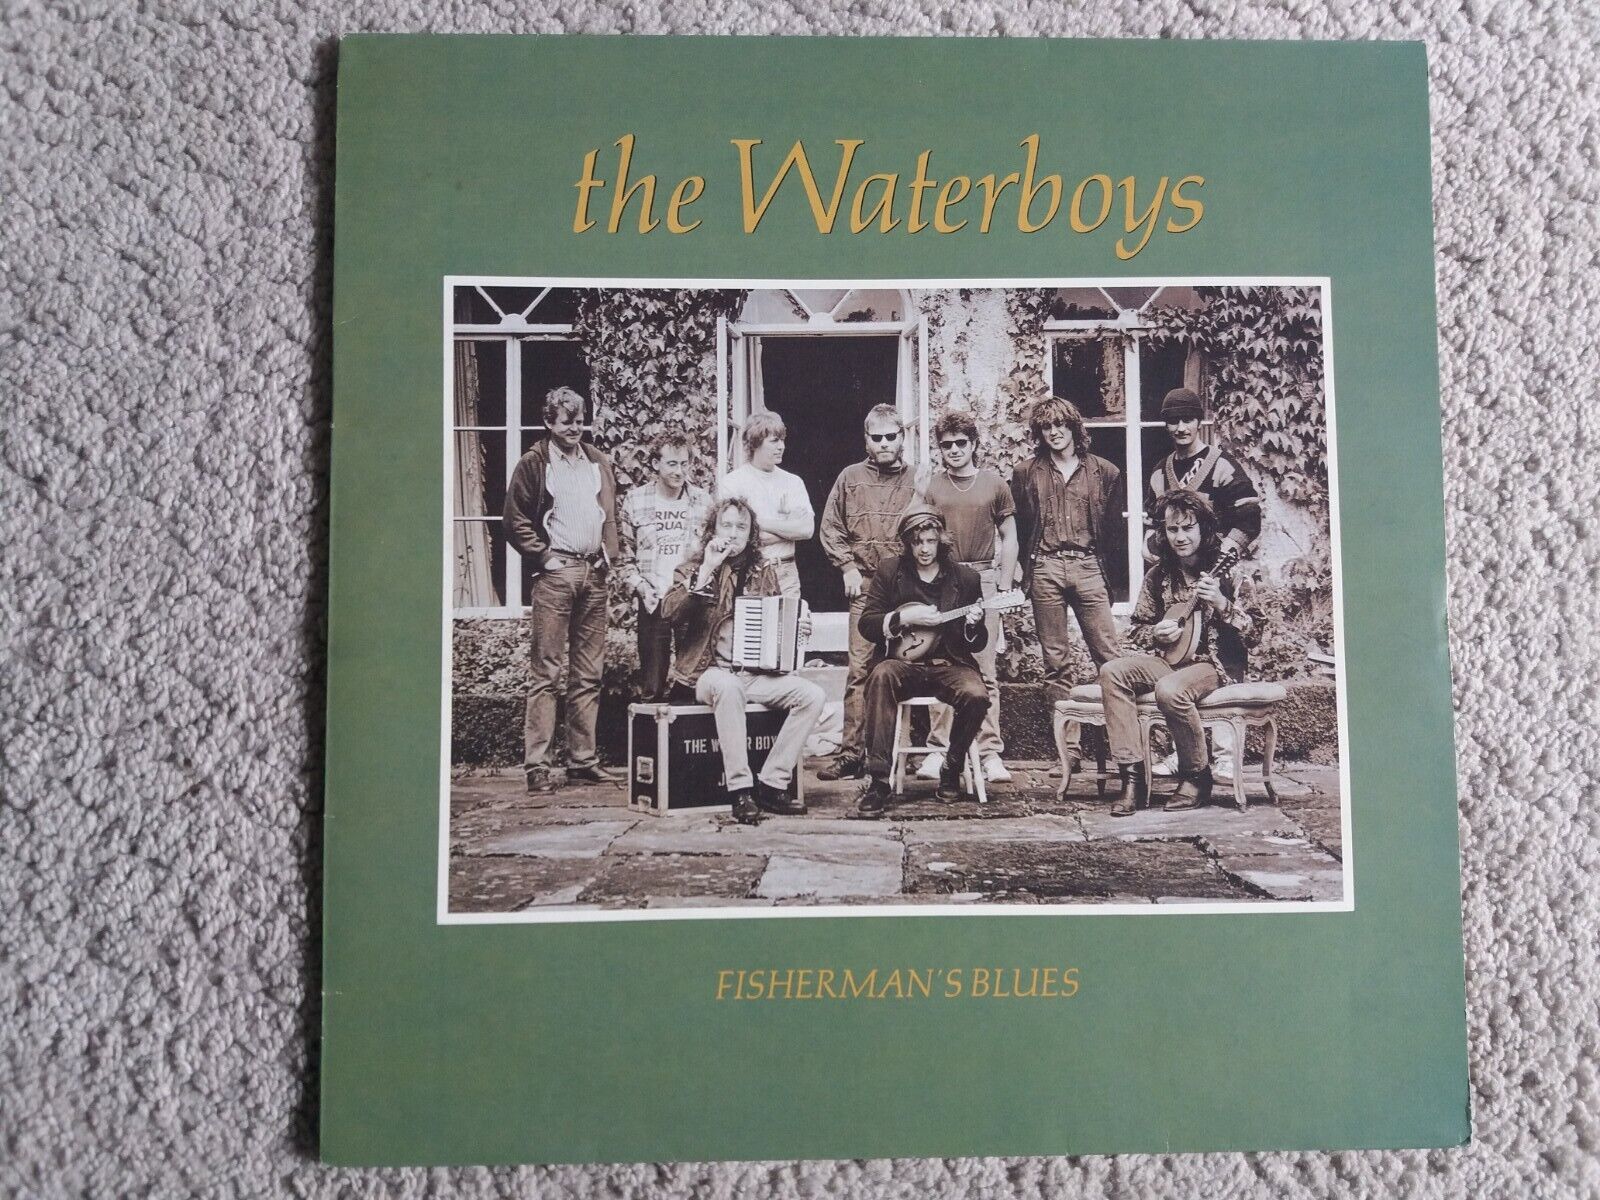 Vinyl 12" LP - The Waterboys - Fisherman's Blues - First Press - Very Gd/Plus Co